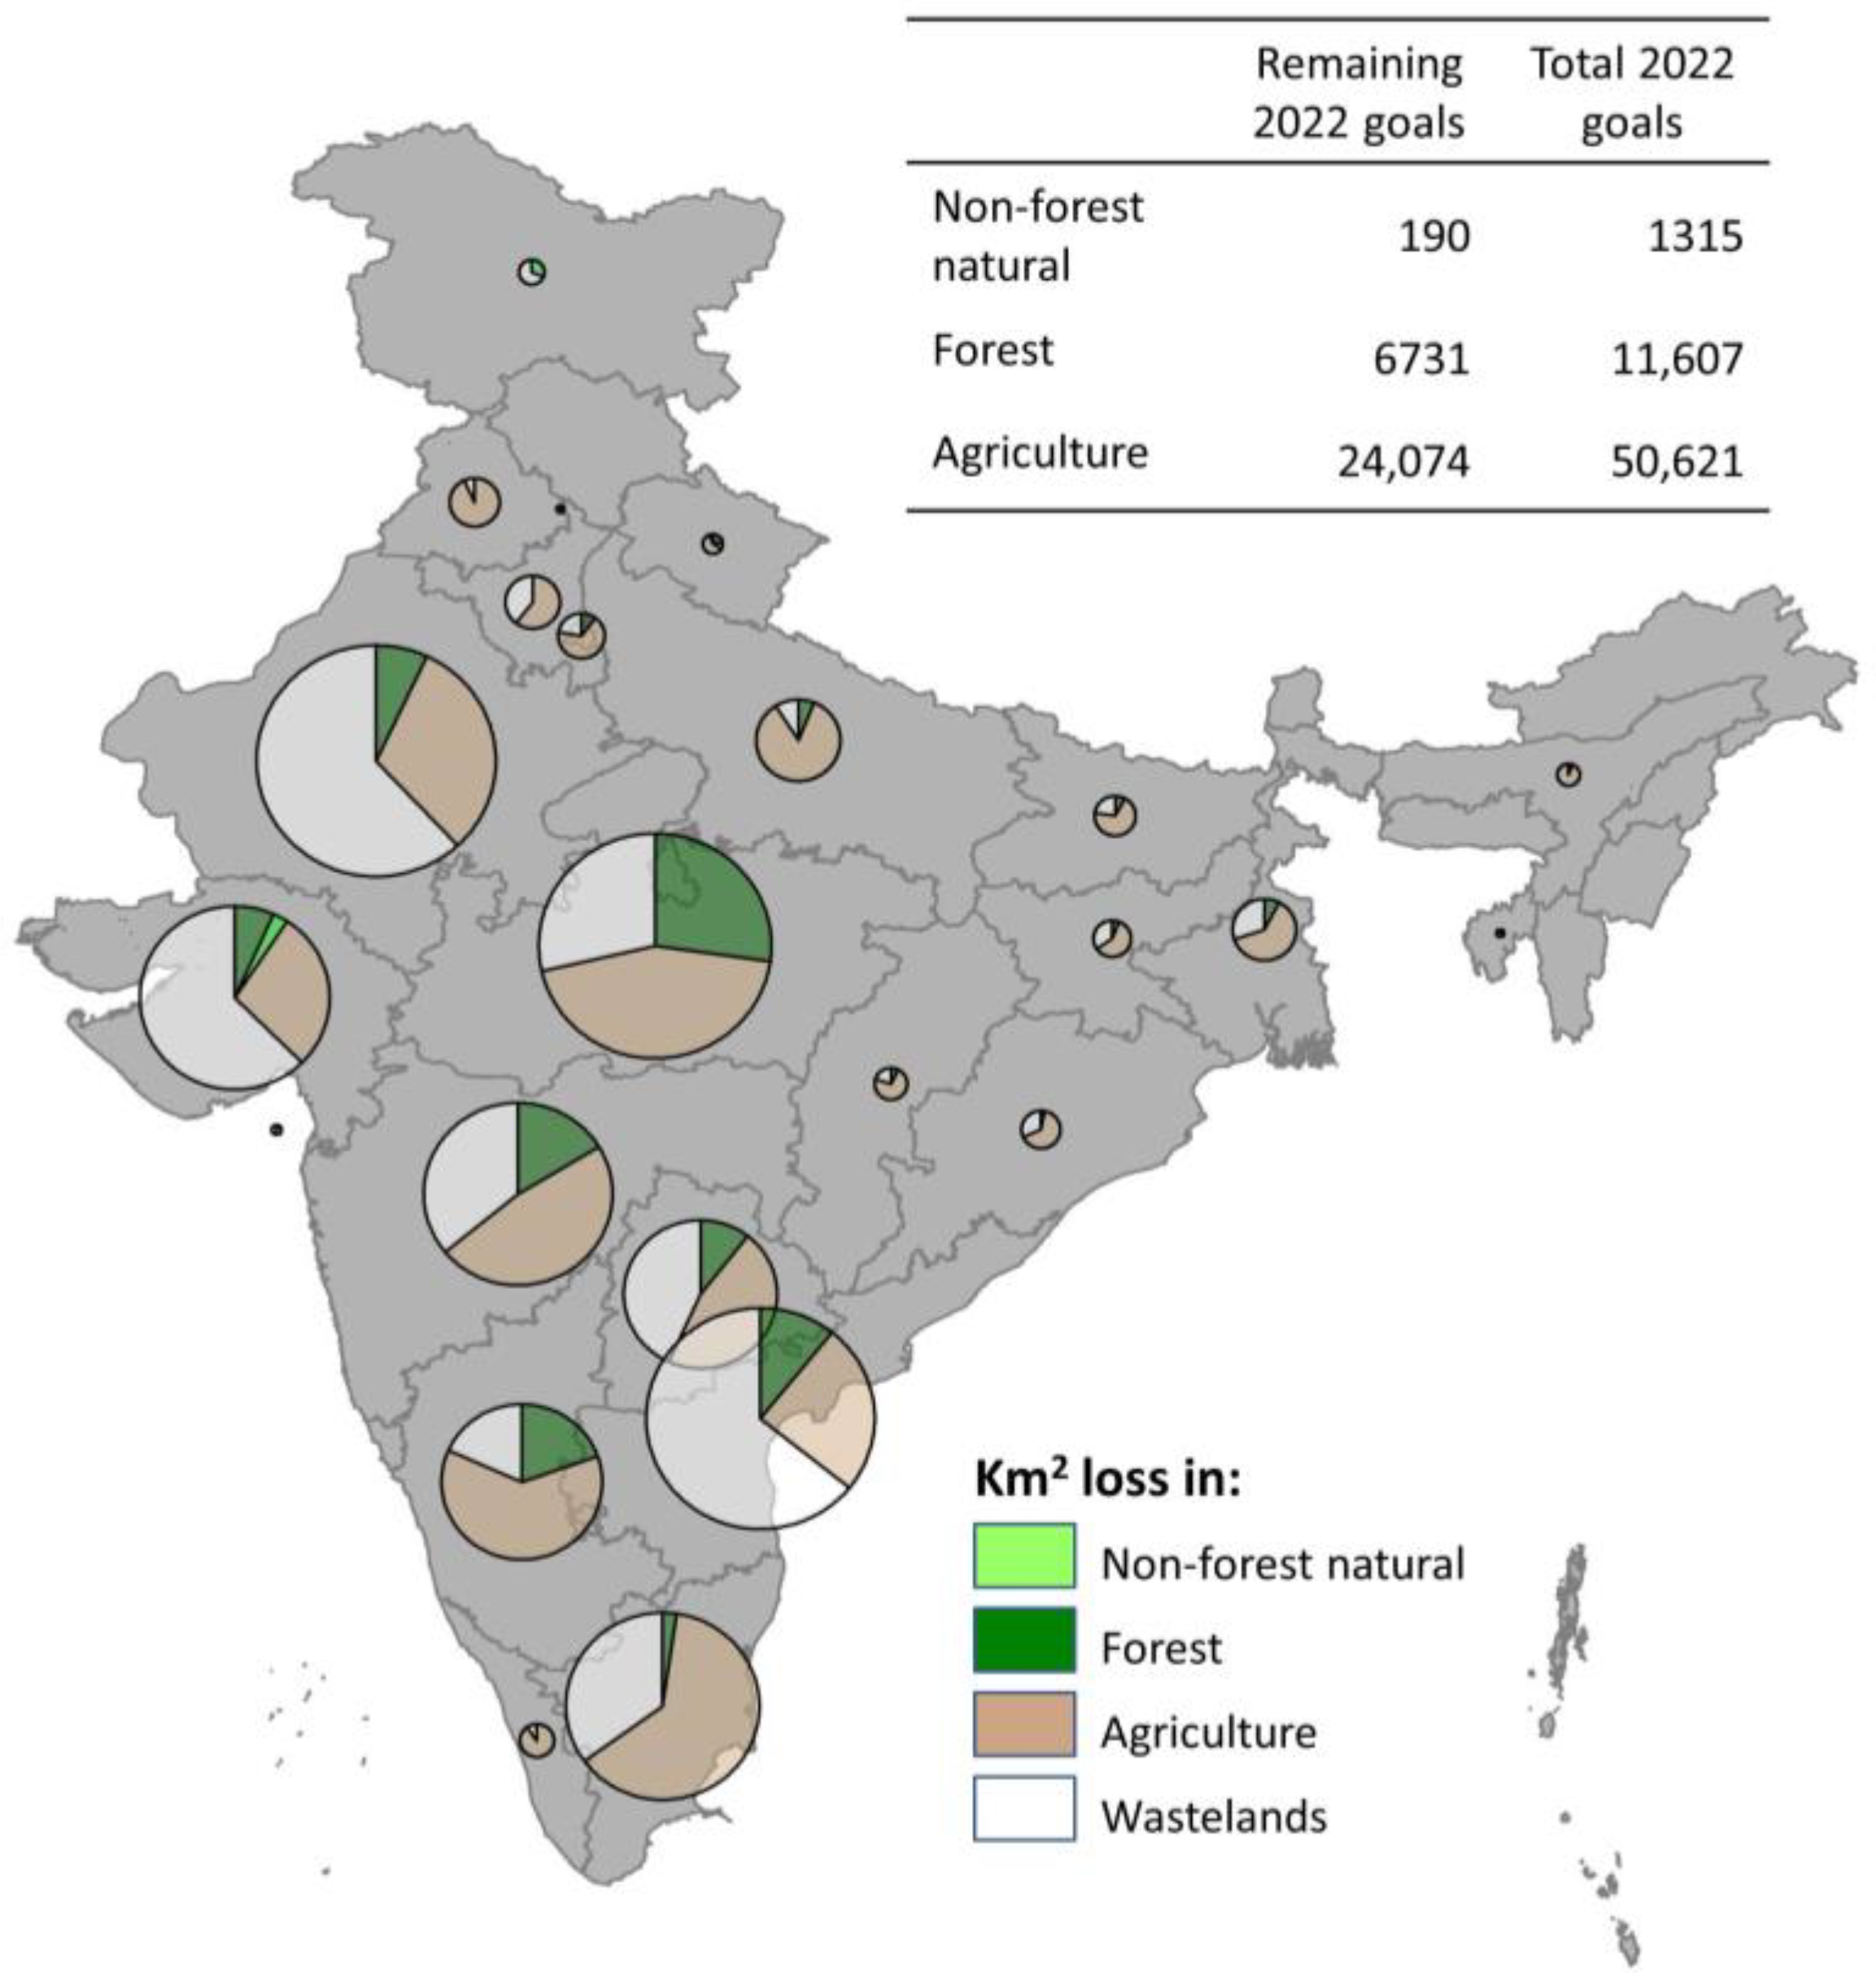 short essay on india's road map to renewable energy